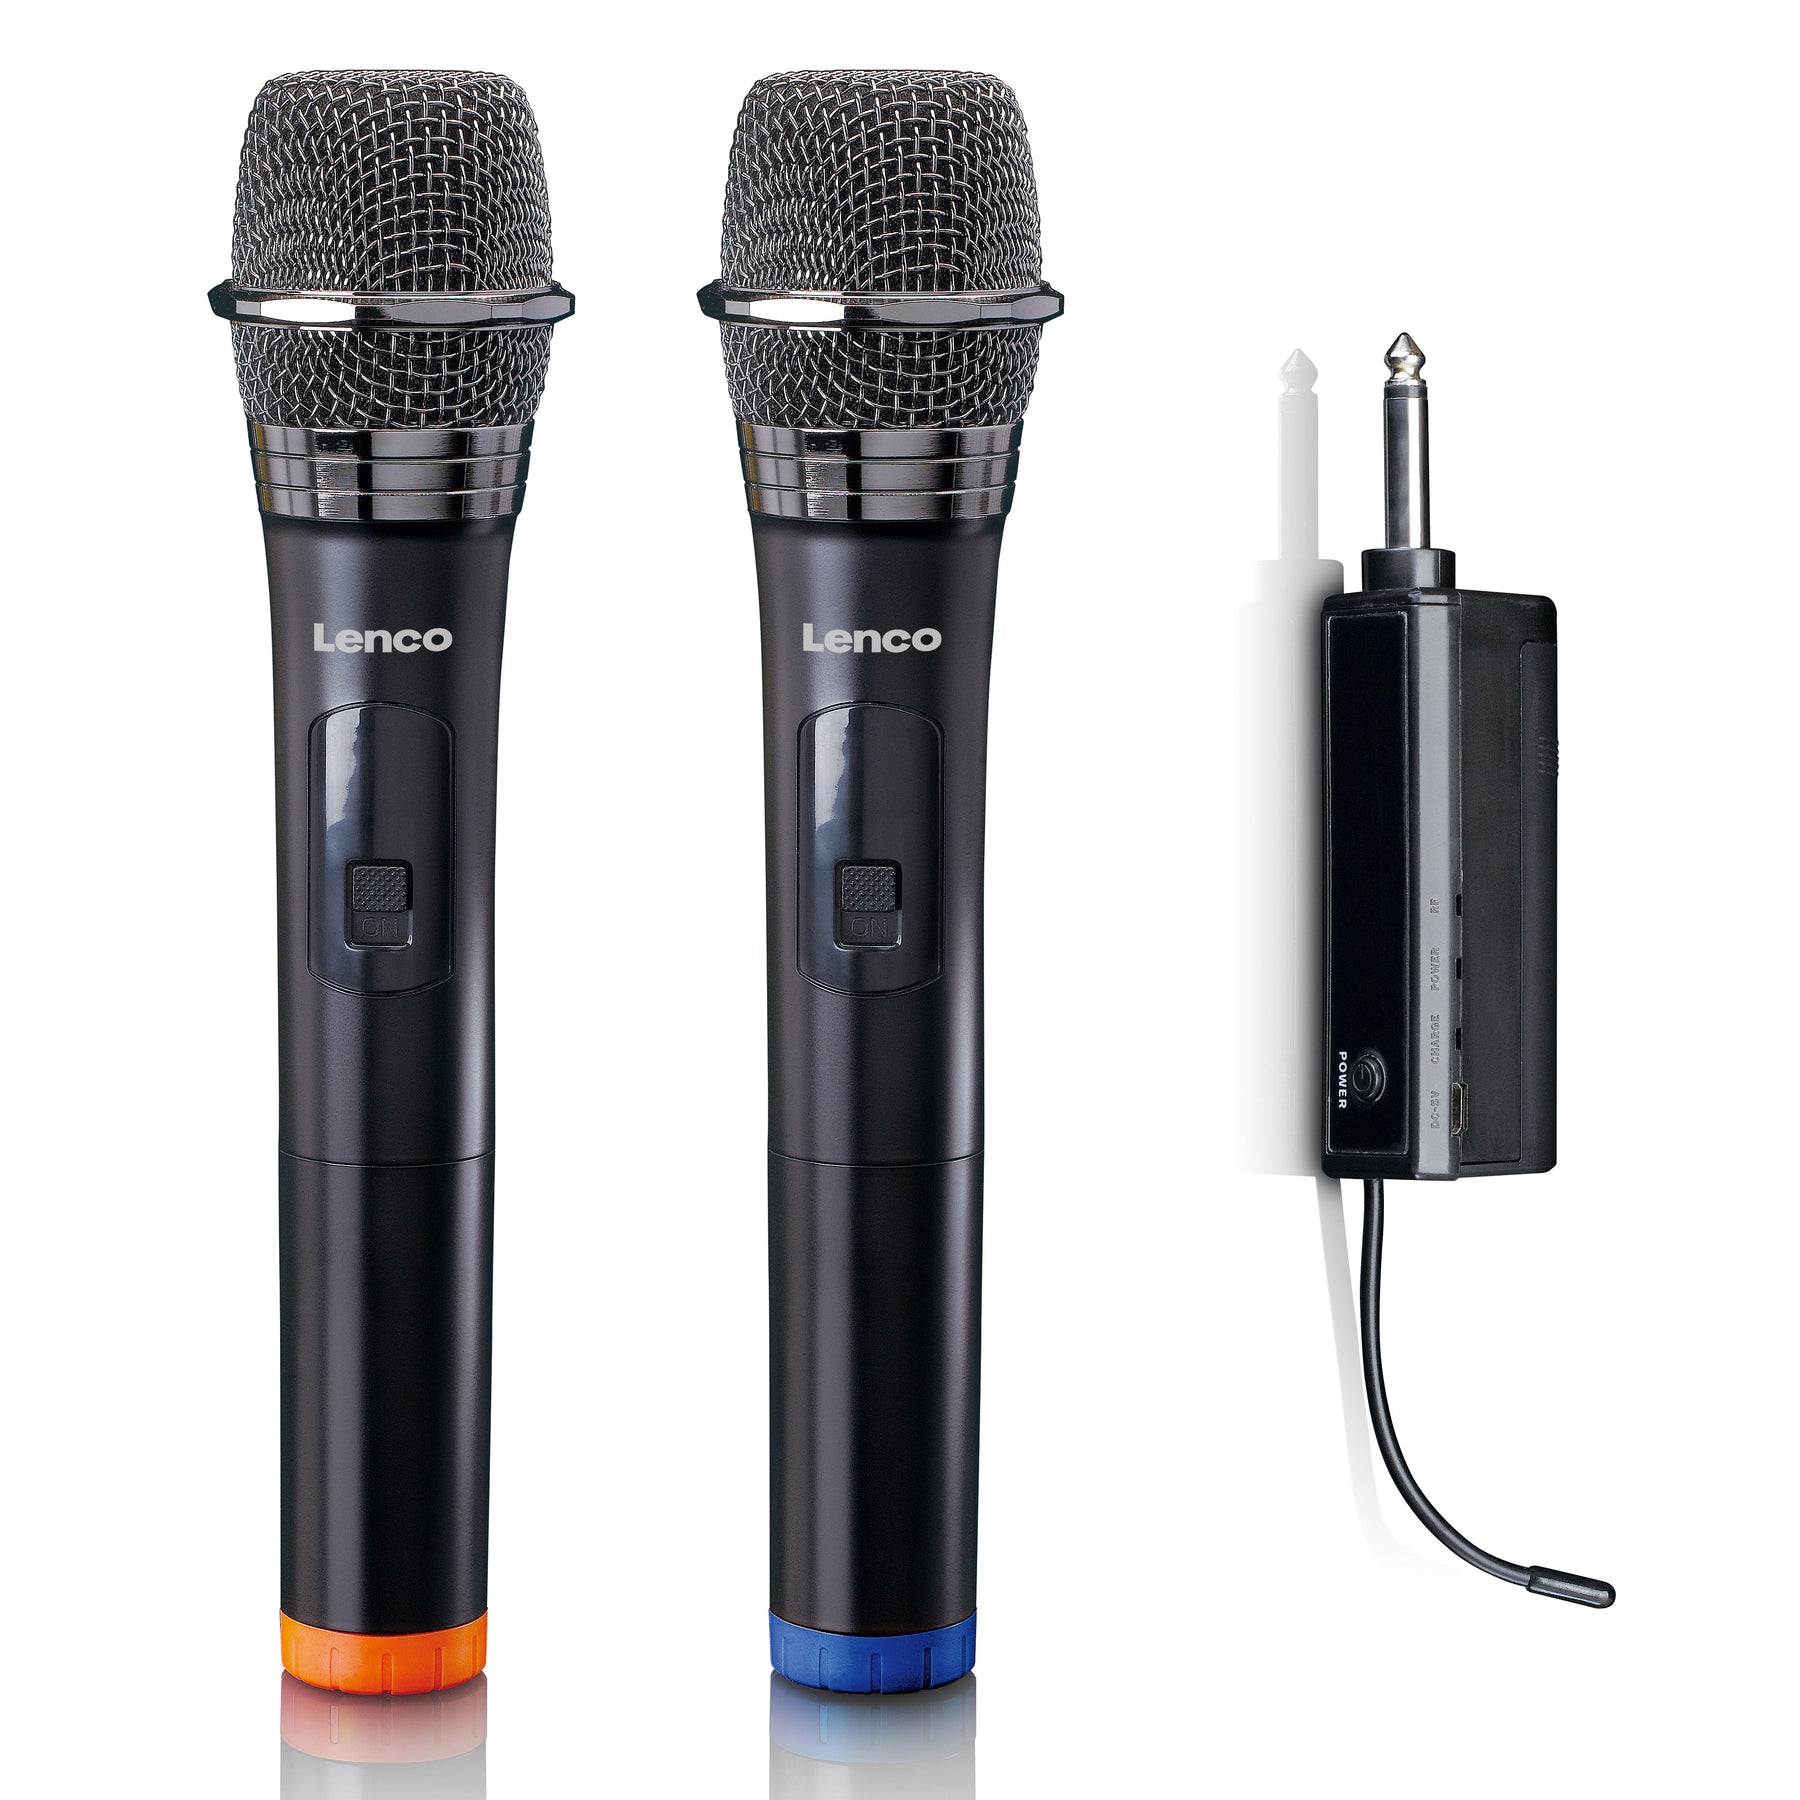 LENCO - battery wireless receiver portable - powered Set of microphones MCW-020BK 2 with